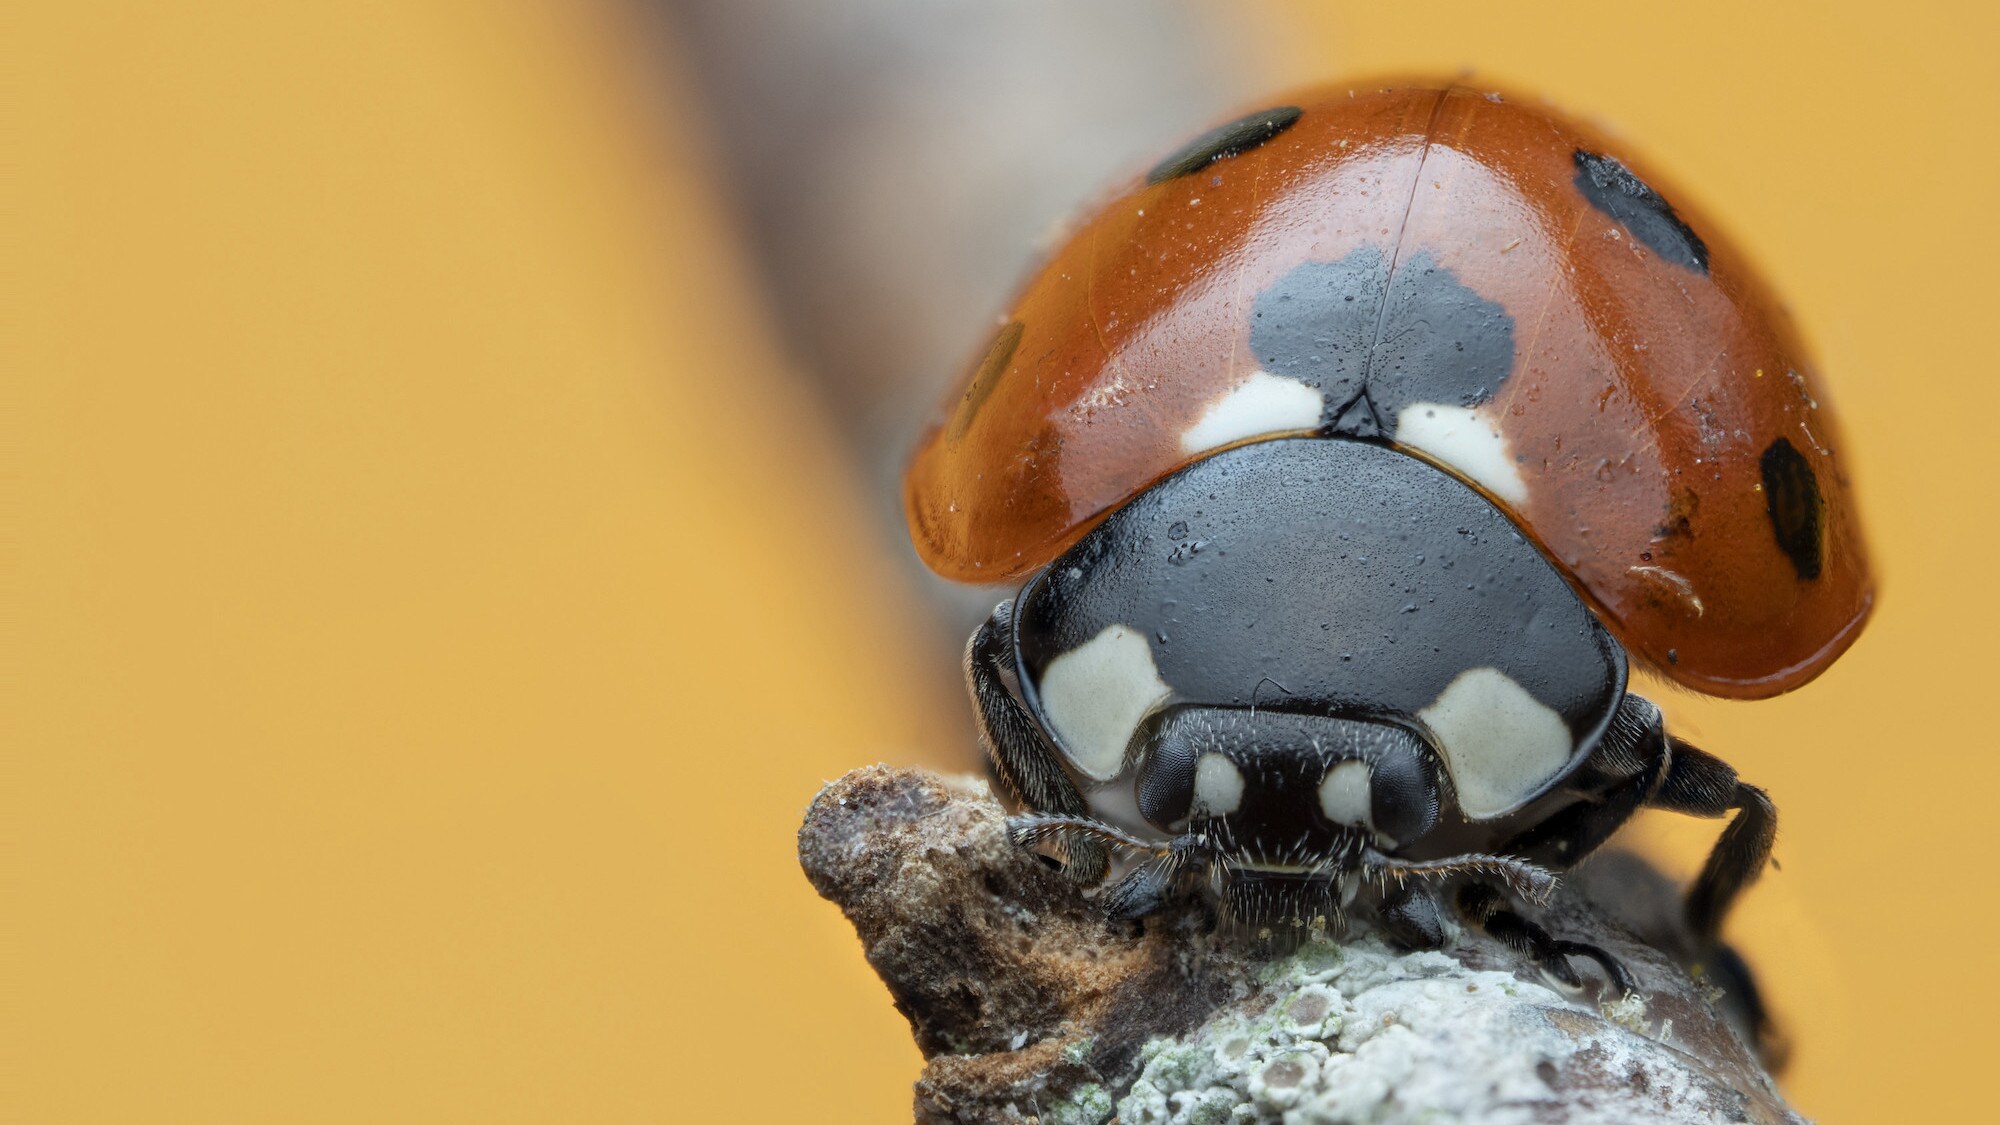 A seven spotted ladybird standing on a branch is featured in "The Busy Farm" episode of "A Real Bug's Life." (National Geographic/Jamie Thorpe)